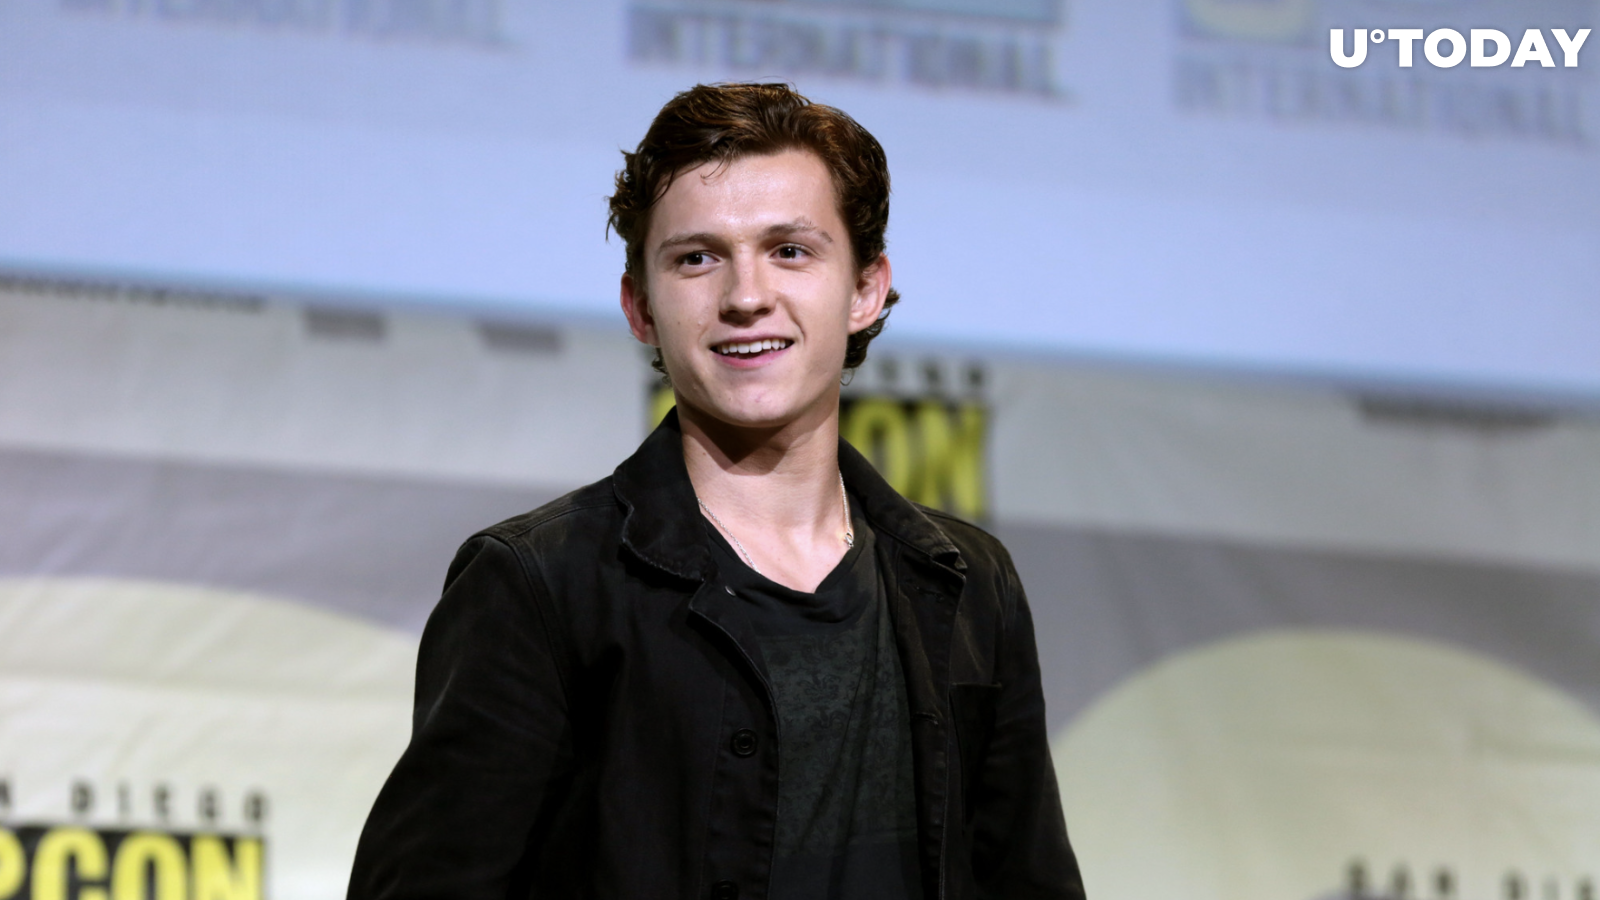 Spider-Man Actor Tom Holland's X Account Hacked to Promote Crypto Scam